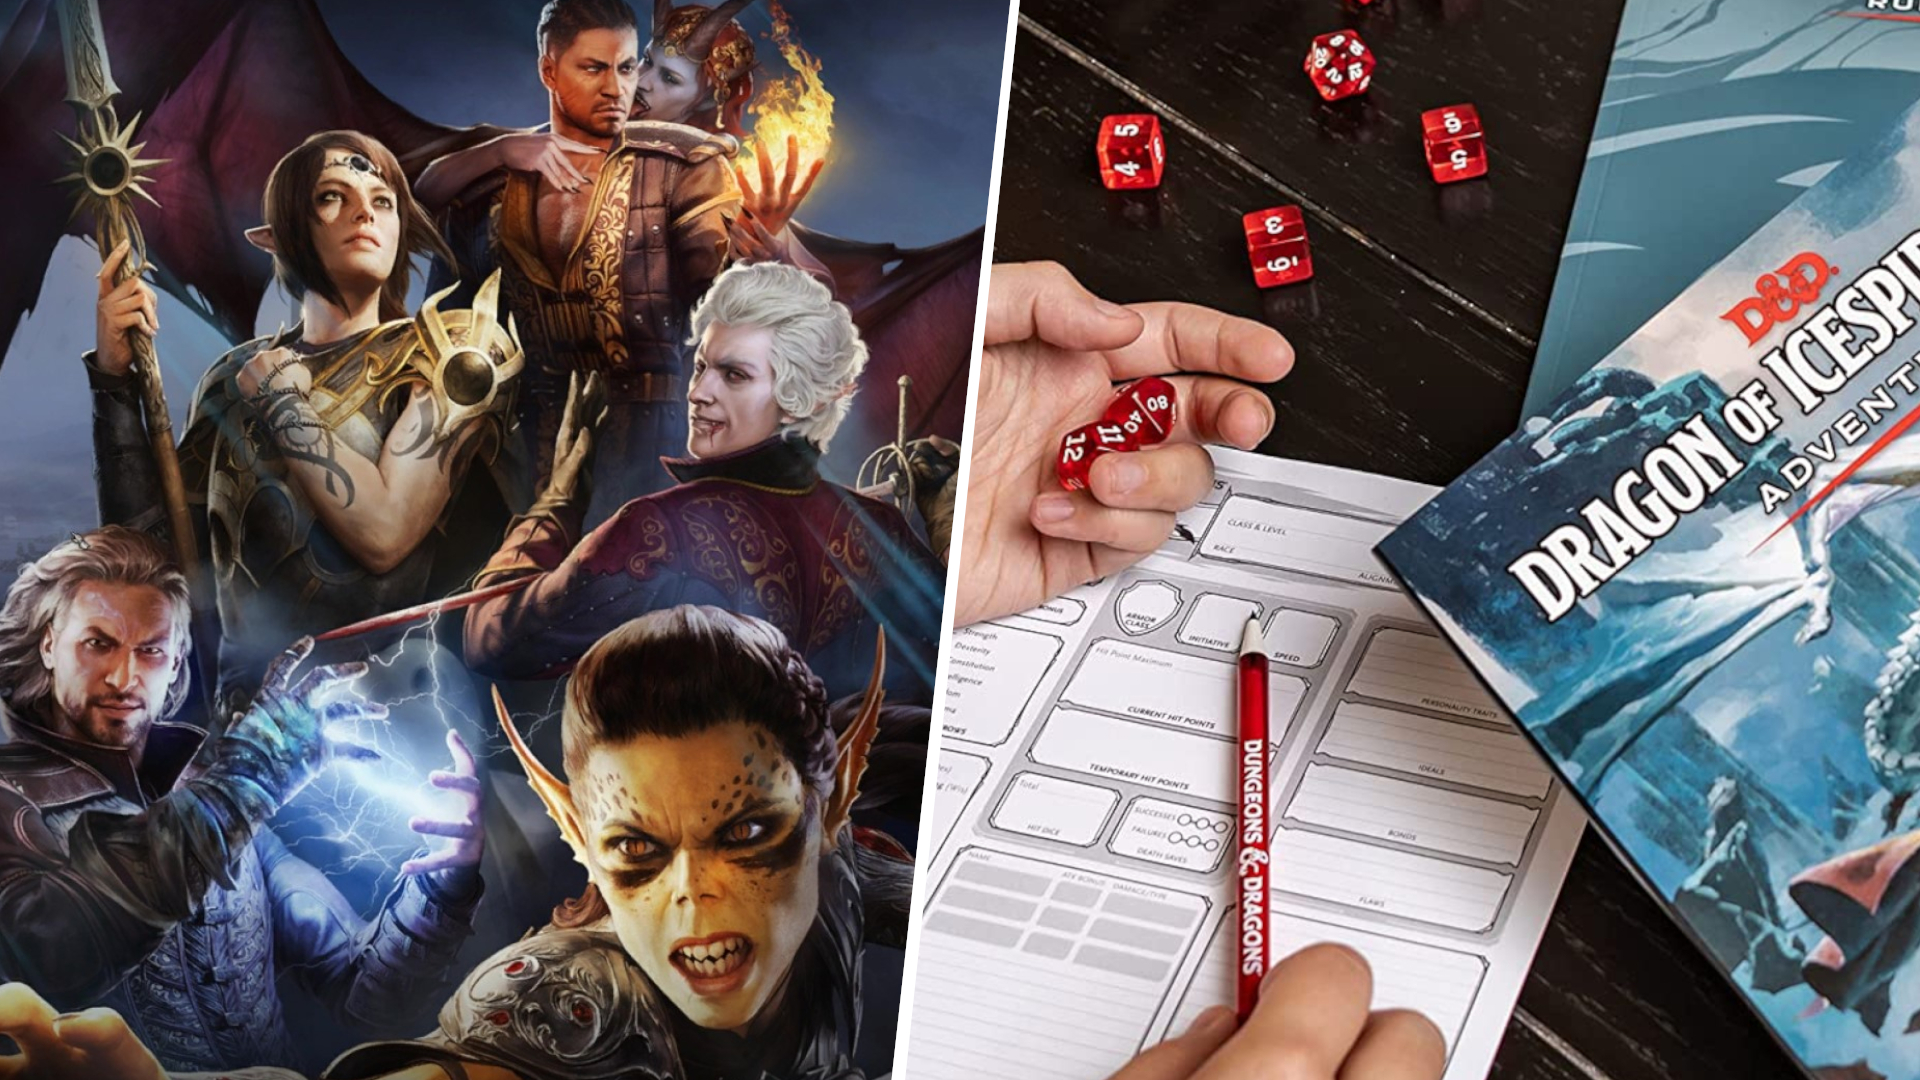 There's a Dungeons and Dragons clicker game